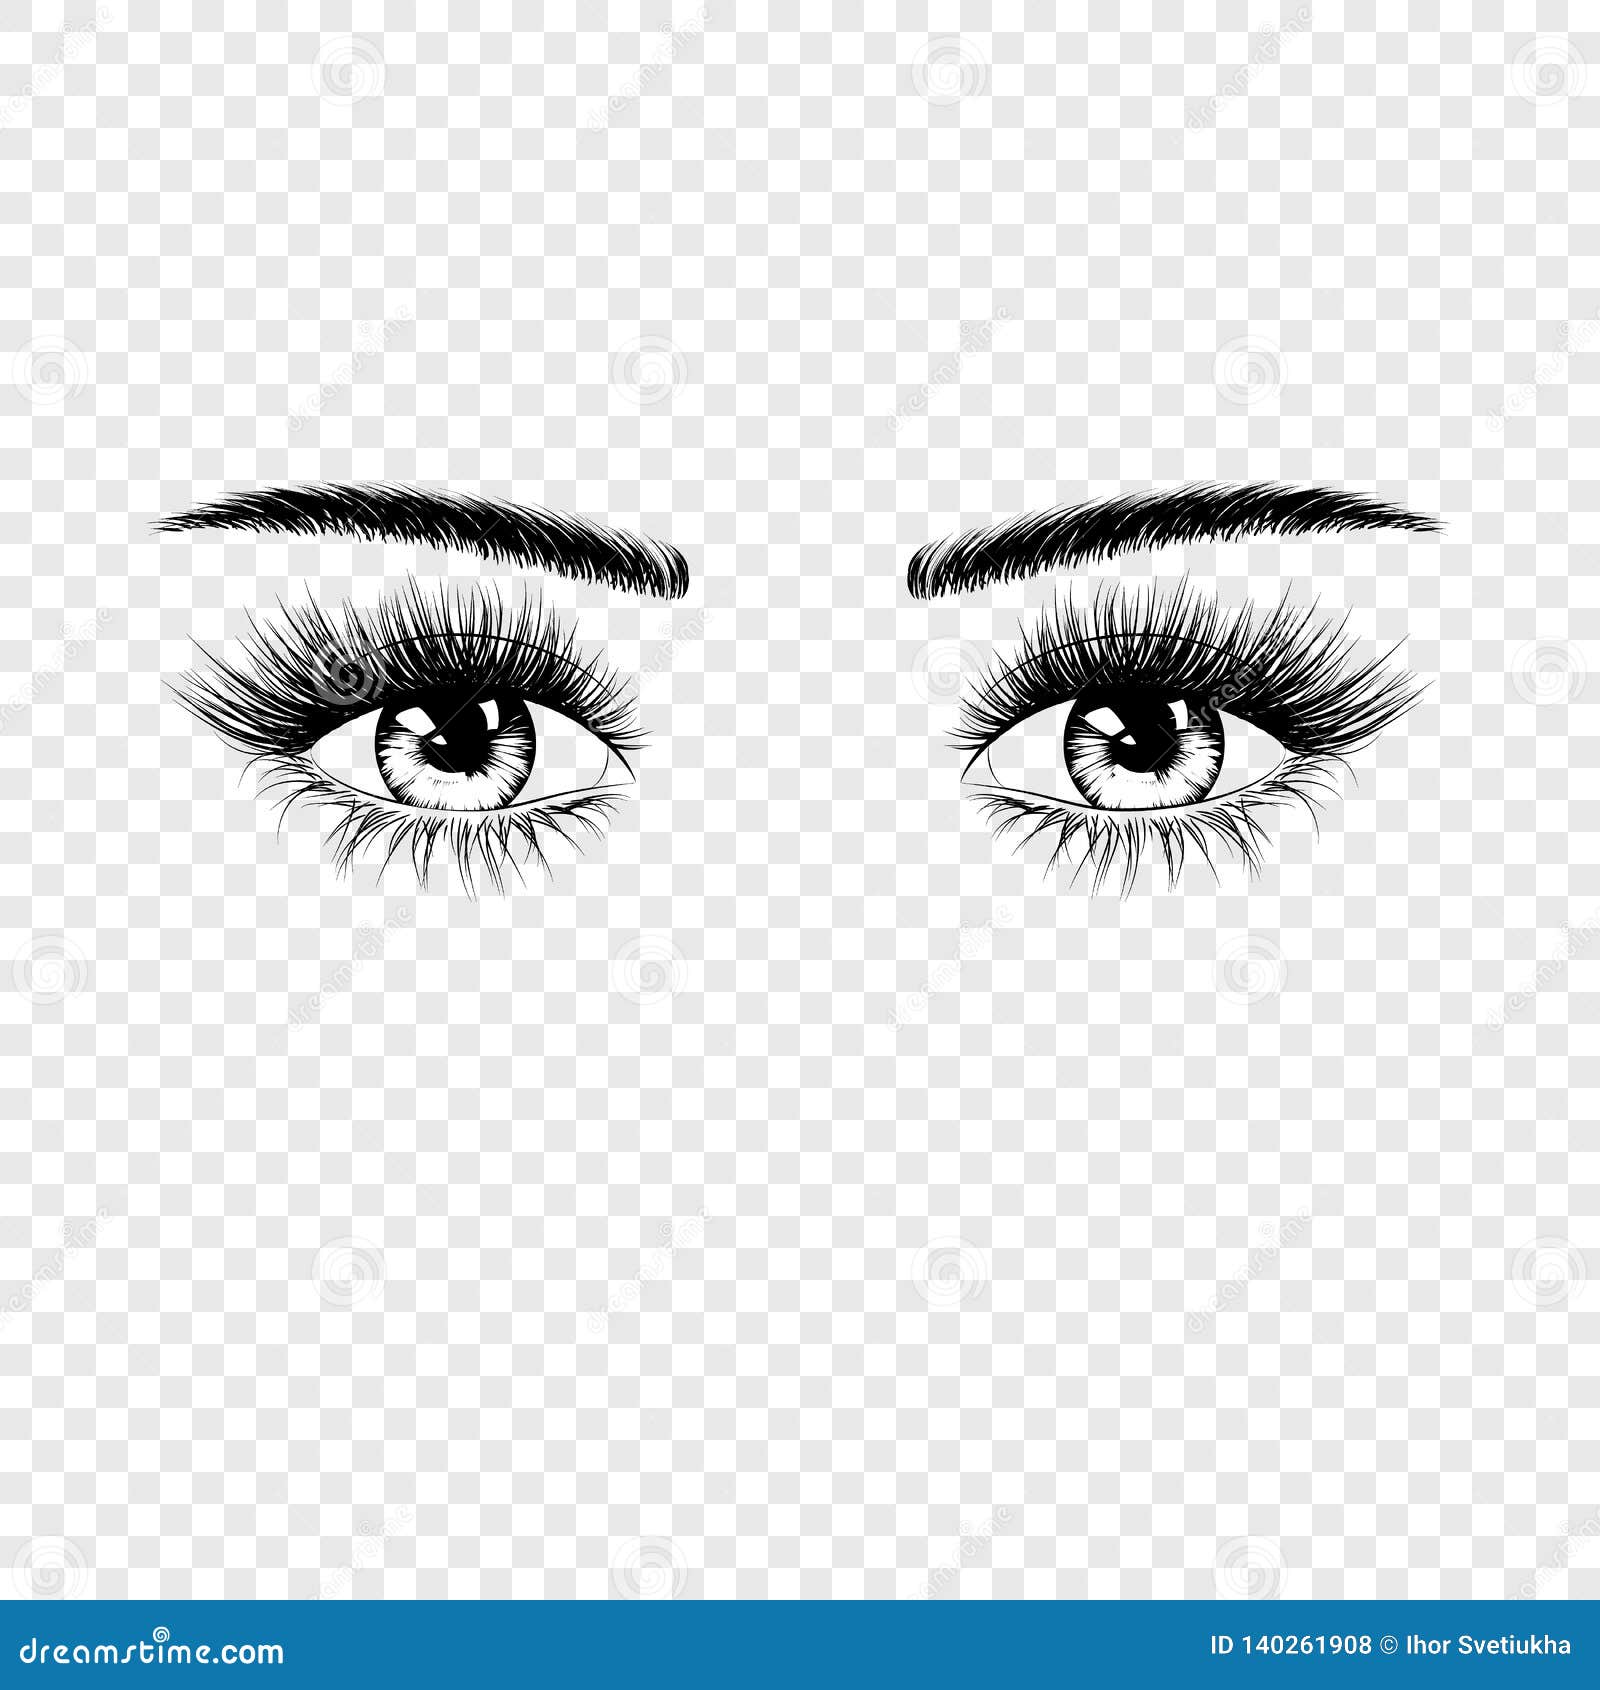 female eyes silhouette with eyelashes and eyebrows.    on transparent background